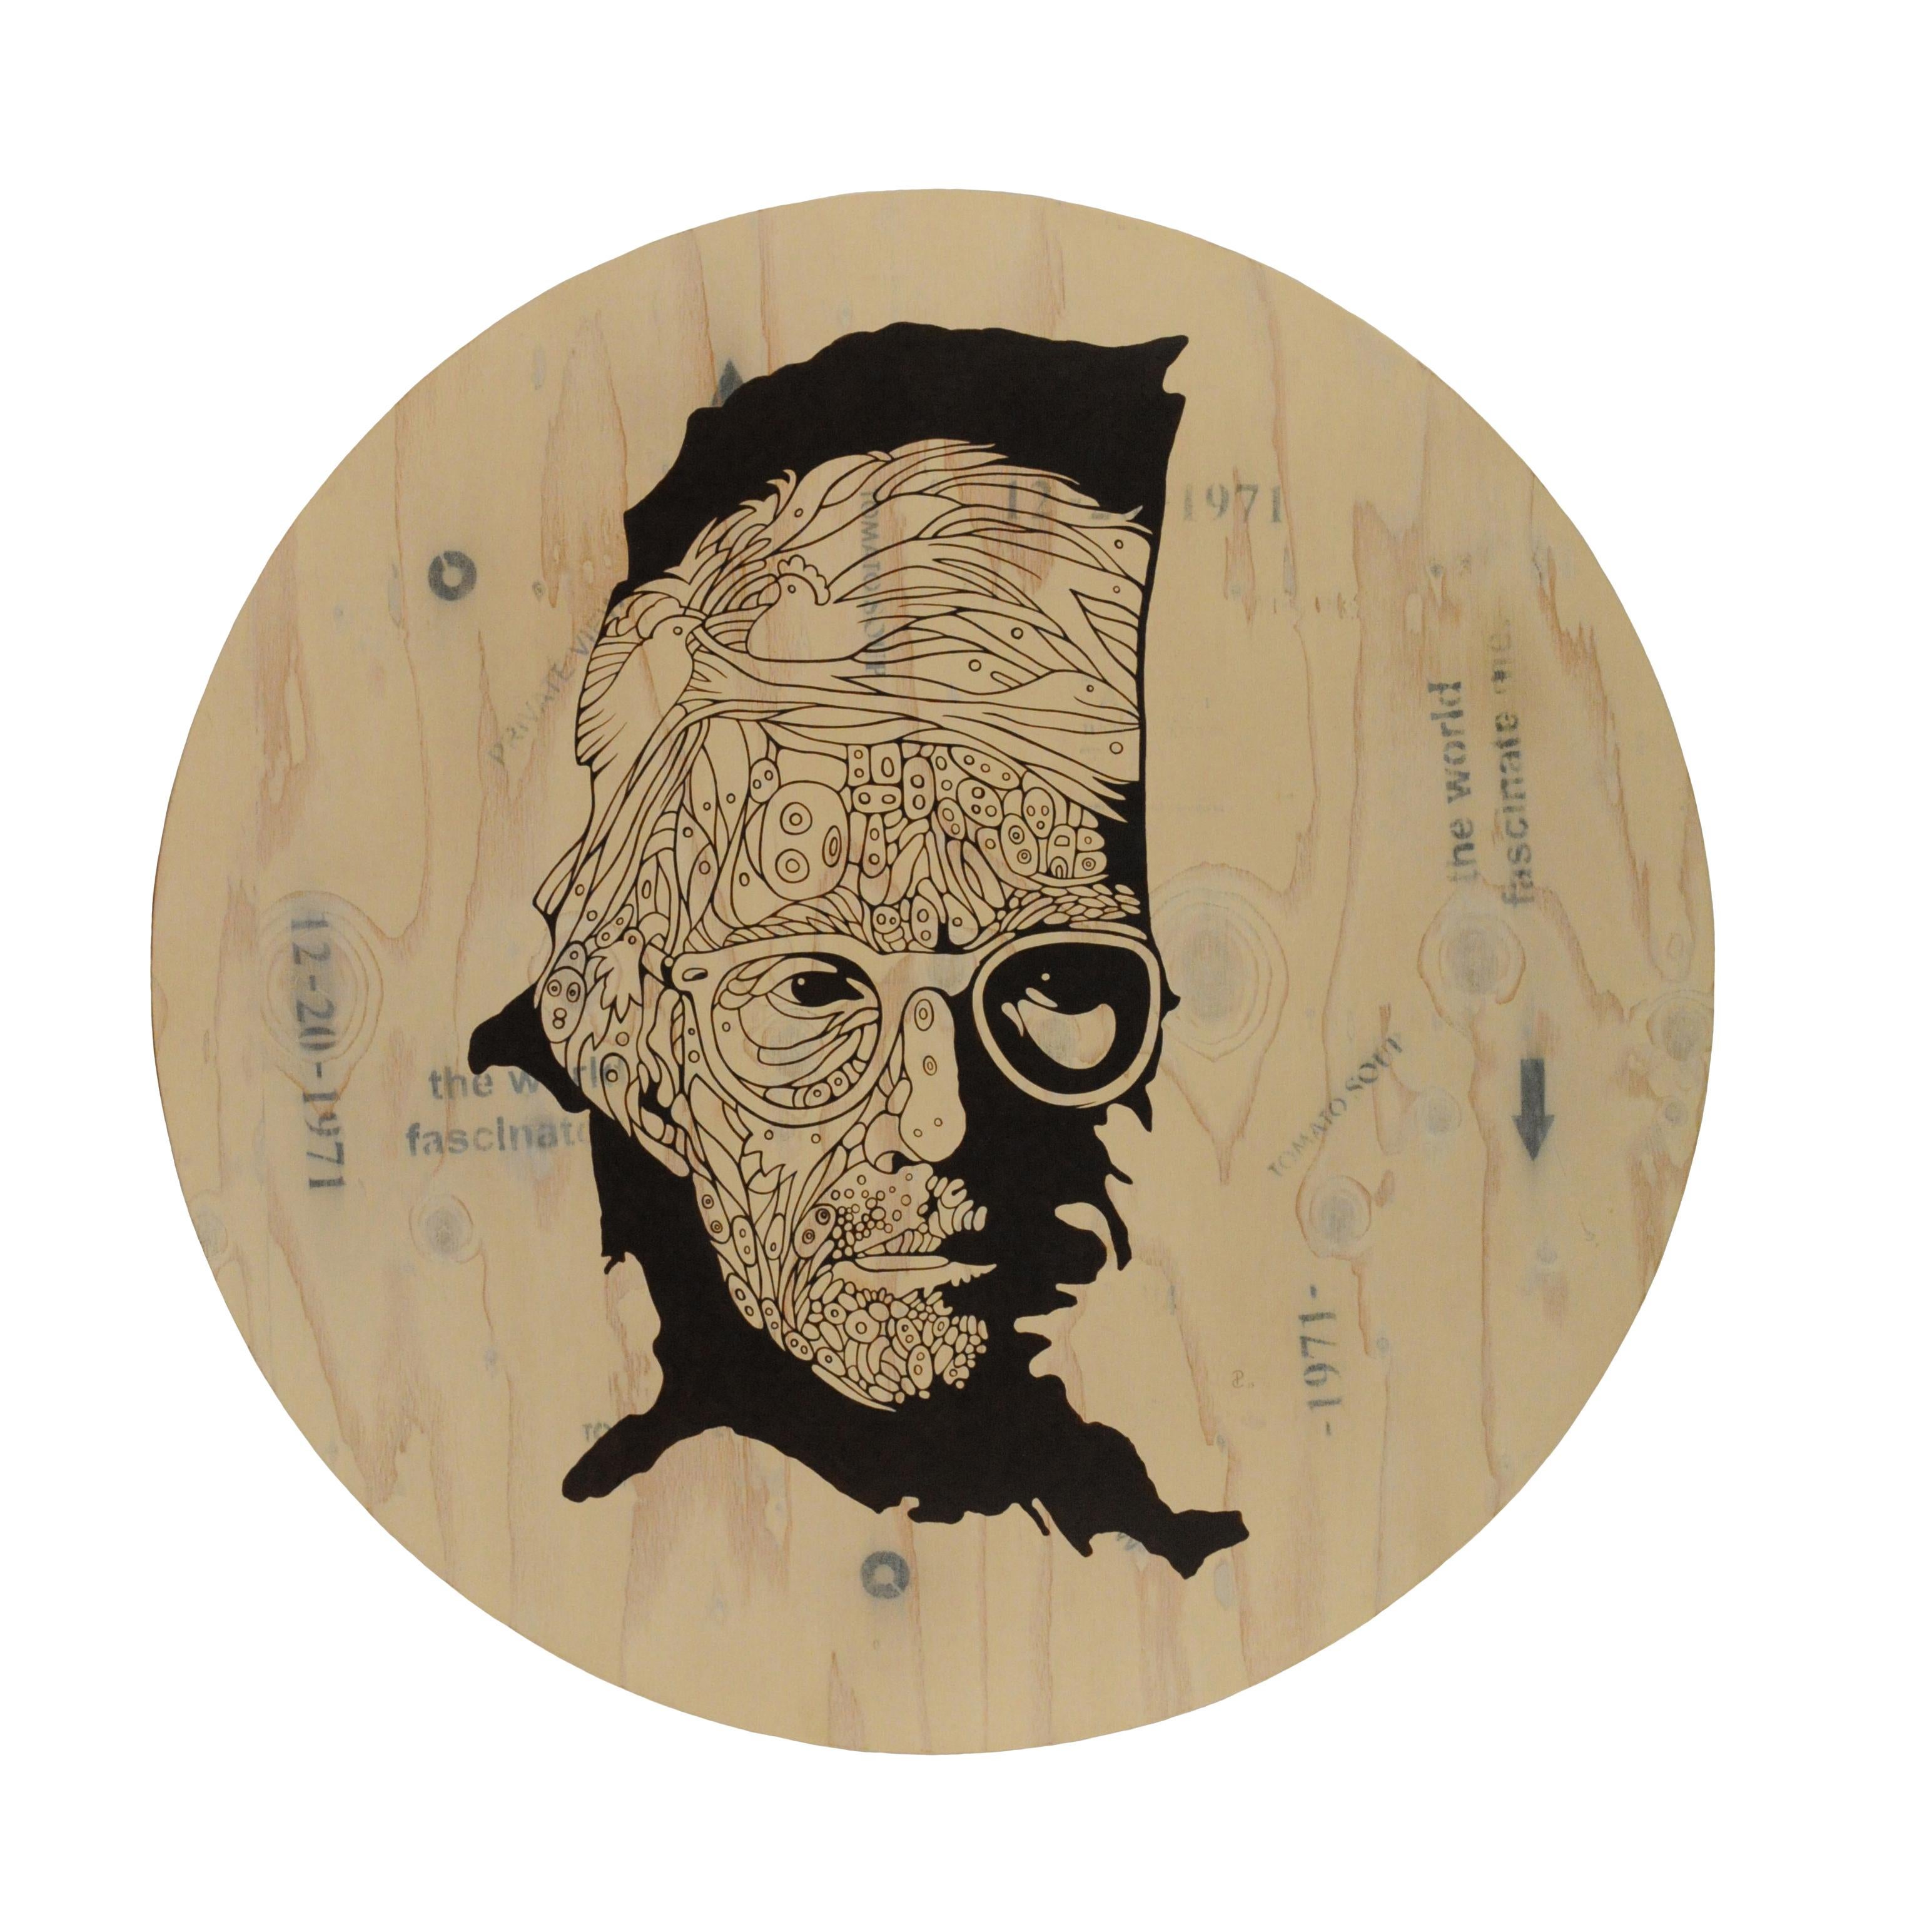 Pablo Caviedes Portrait Painting - Andy Warhol's portrait "On The Map" - Acrylic on wood, circle wall art